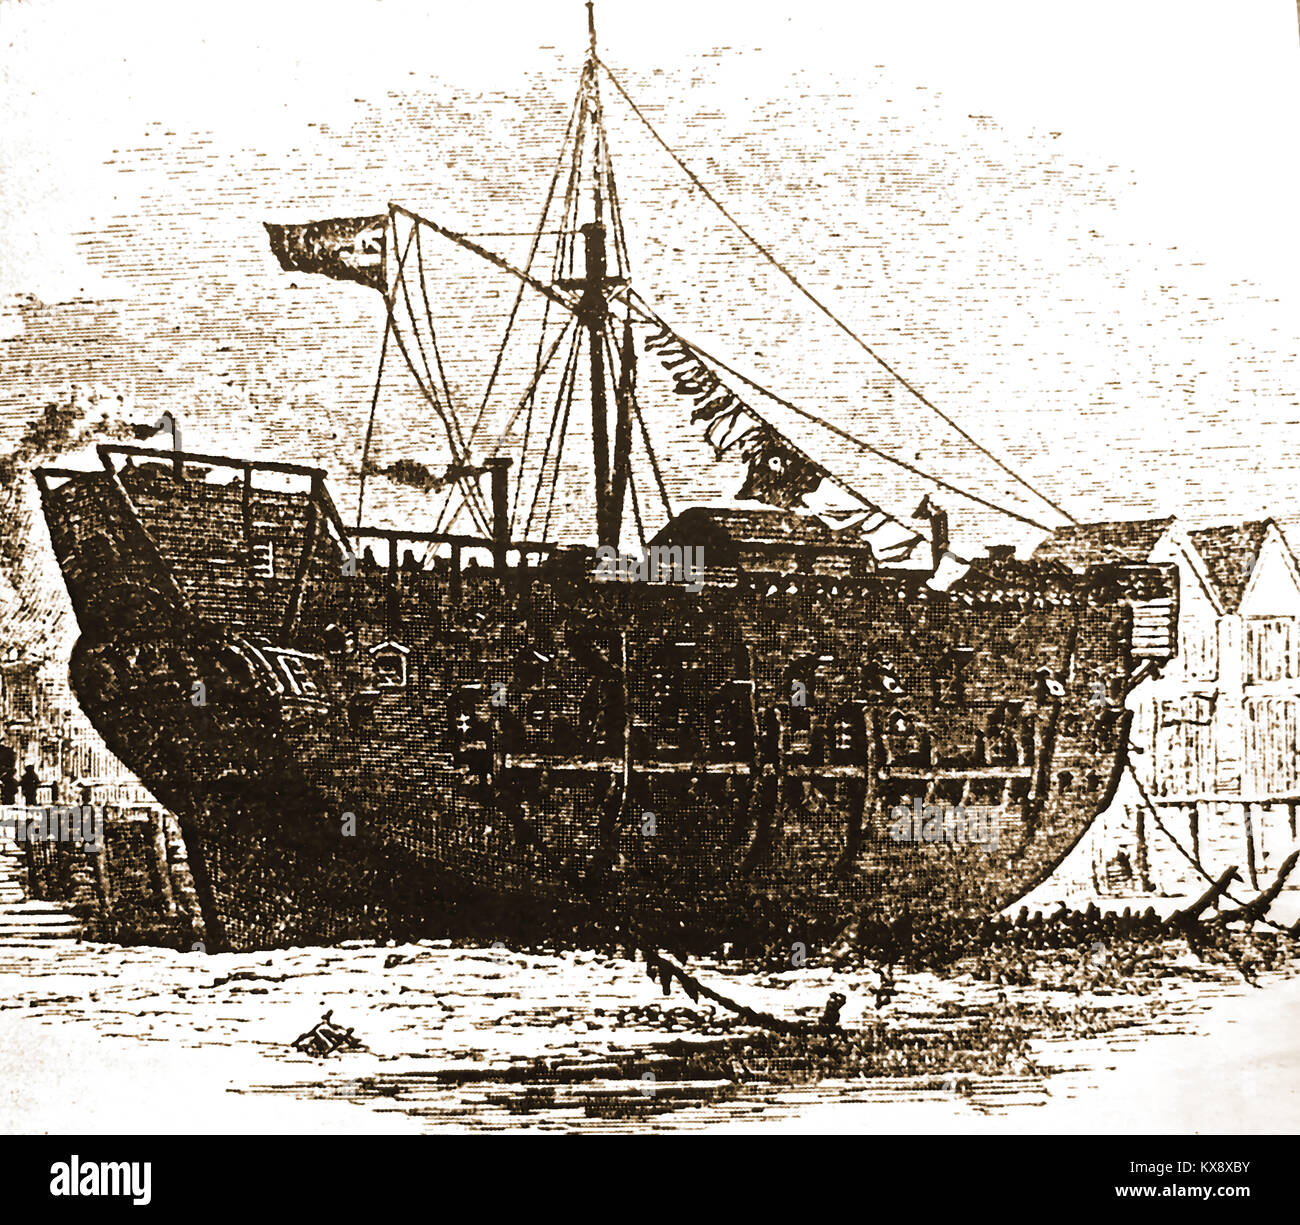 HMS RESOLUTION  (formerly the Whitby collier 'Marquis of Granby', launched at Whitby, Yorkshire in 1770 - An unflattering and unofficial  original sketch of Captain James Cook's ship,  as she really looked on her voyage of discovery to Australia - Stock Photo